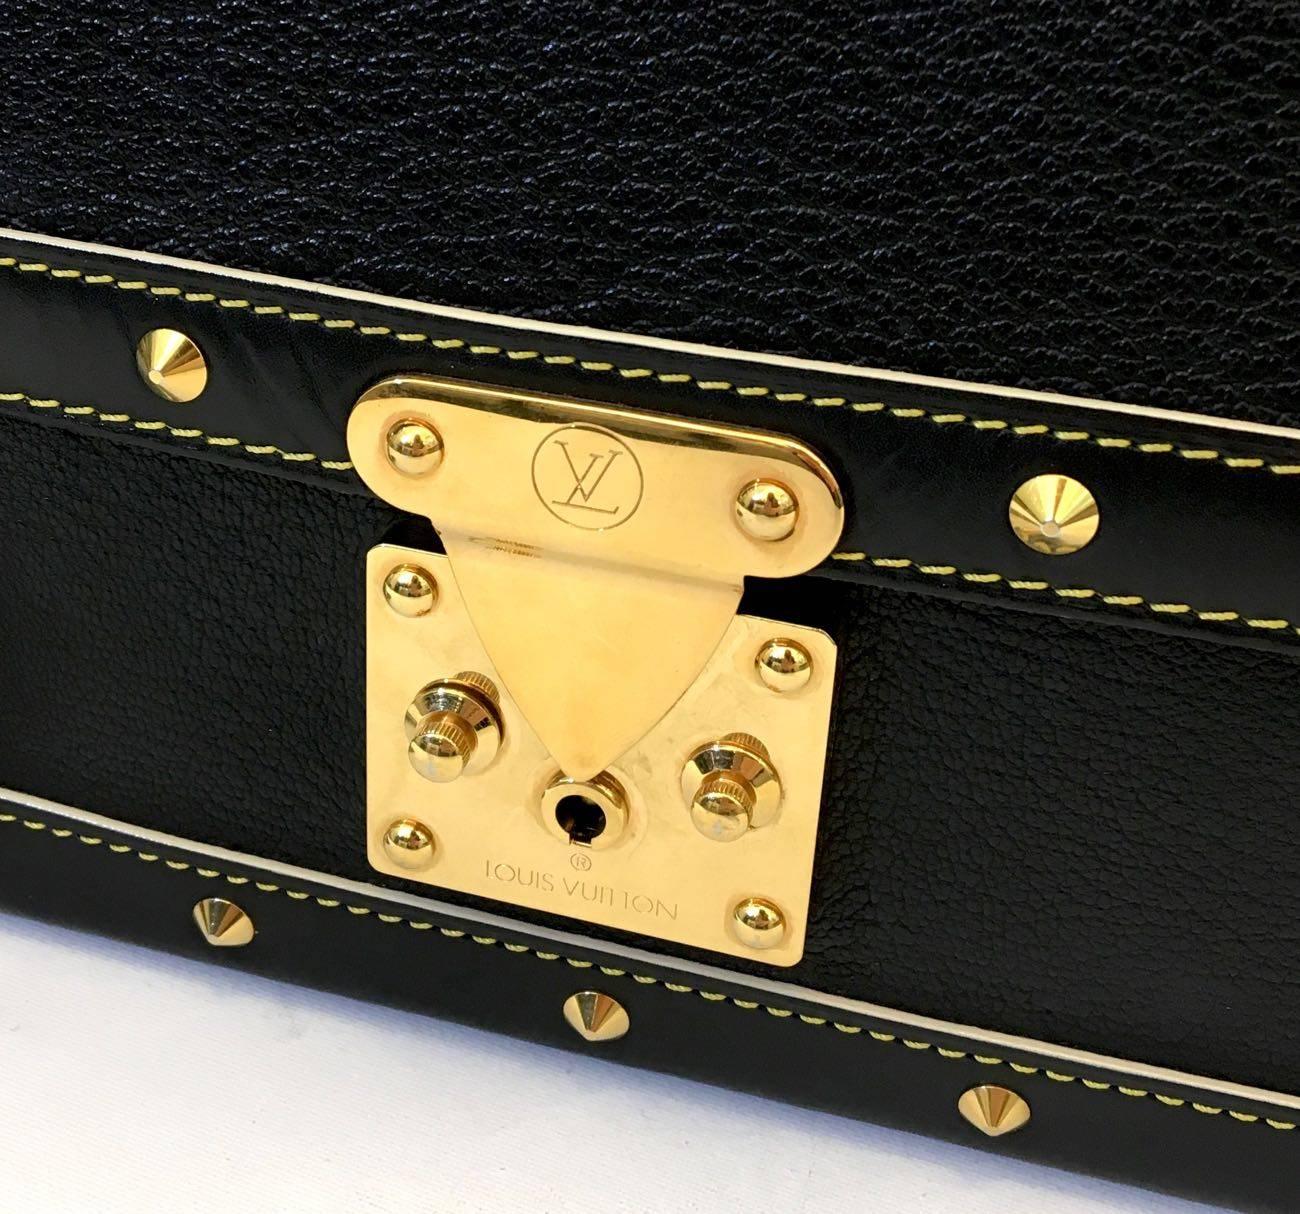 Louis Vuitton Limited Edition Bag 2003 
Suhali Le Talentueux Handbag Leather
Gold tone corner plates, stud detailing
Crafted from black suhali leather
Stand-out yellow contrast stitching, and gold-tone hardware accents.
Fabbric lined interior.
Good